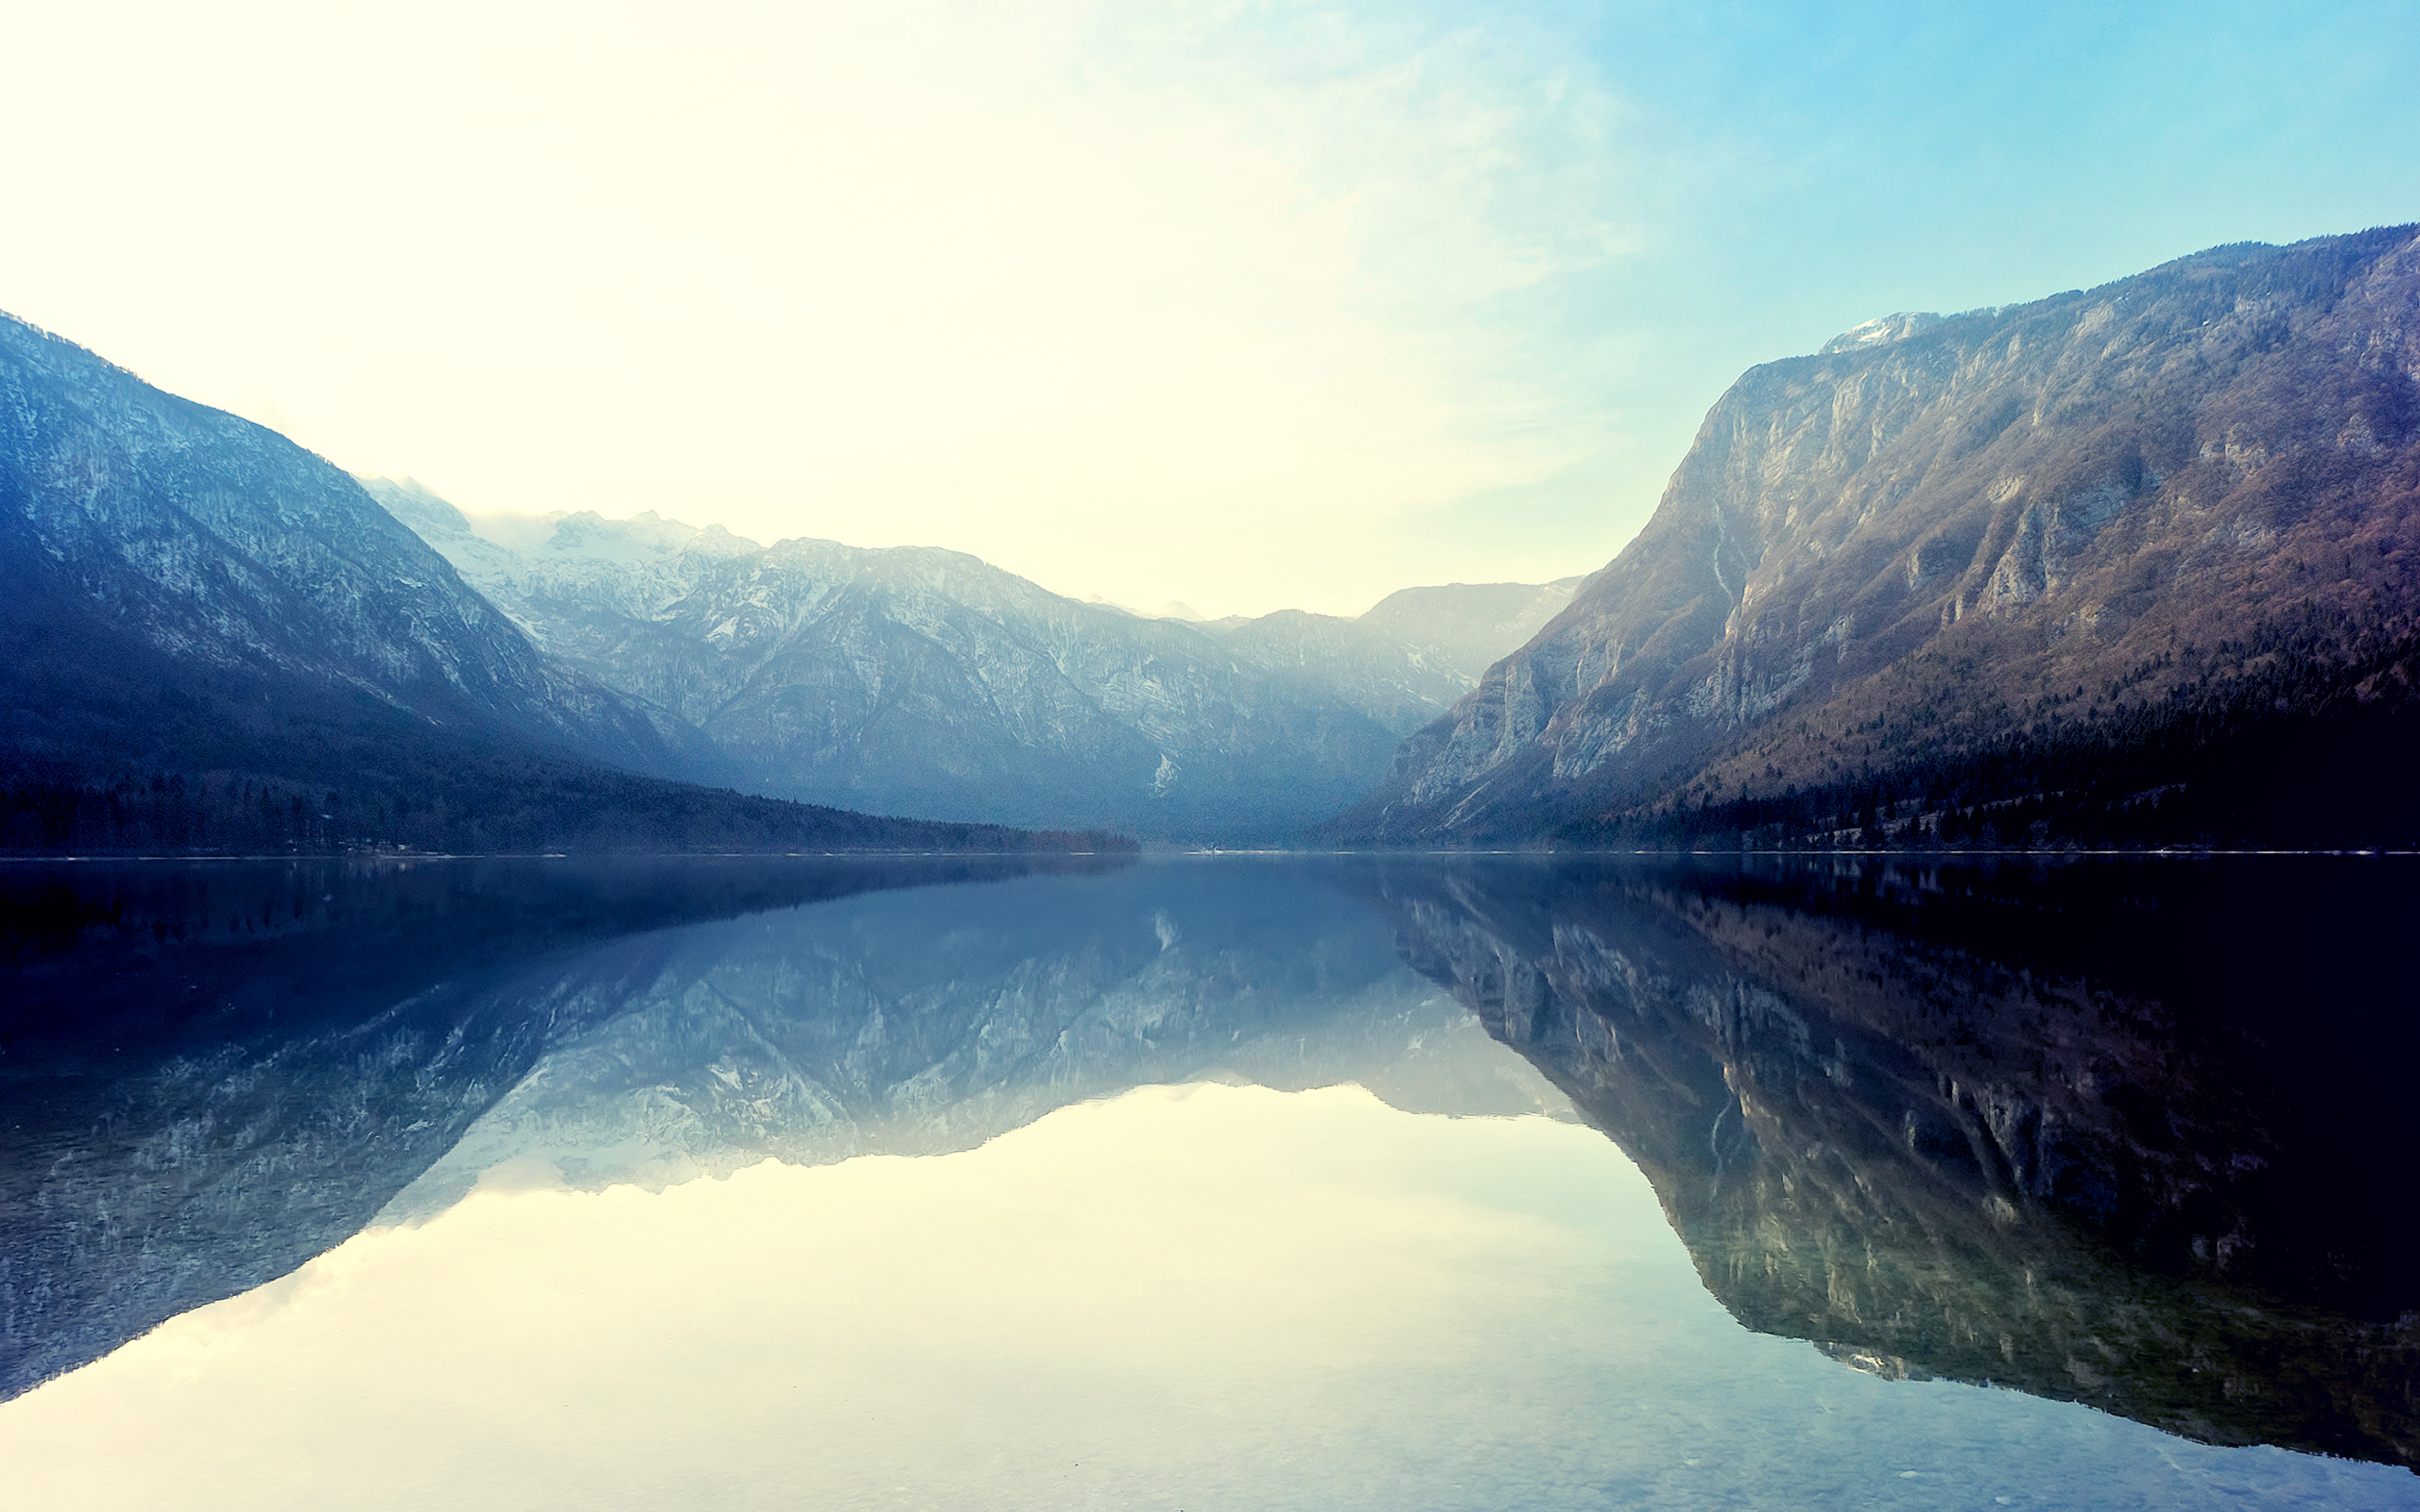 water image wallpaper,sky,body of water,nature,reflection,mountain